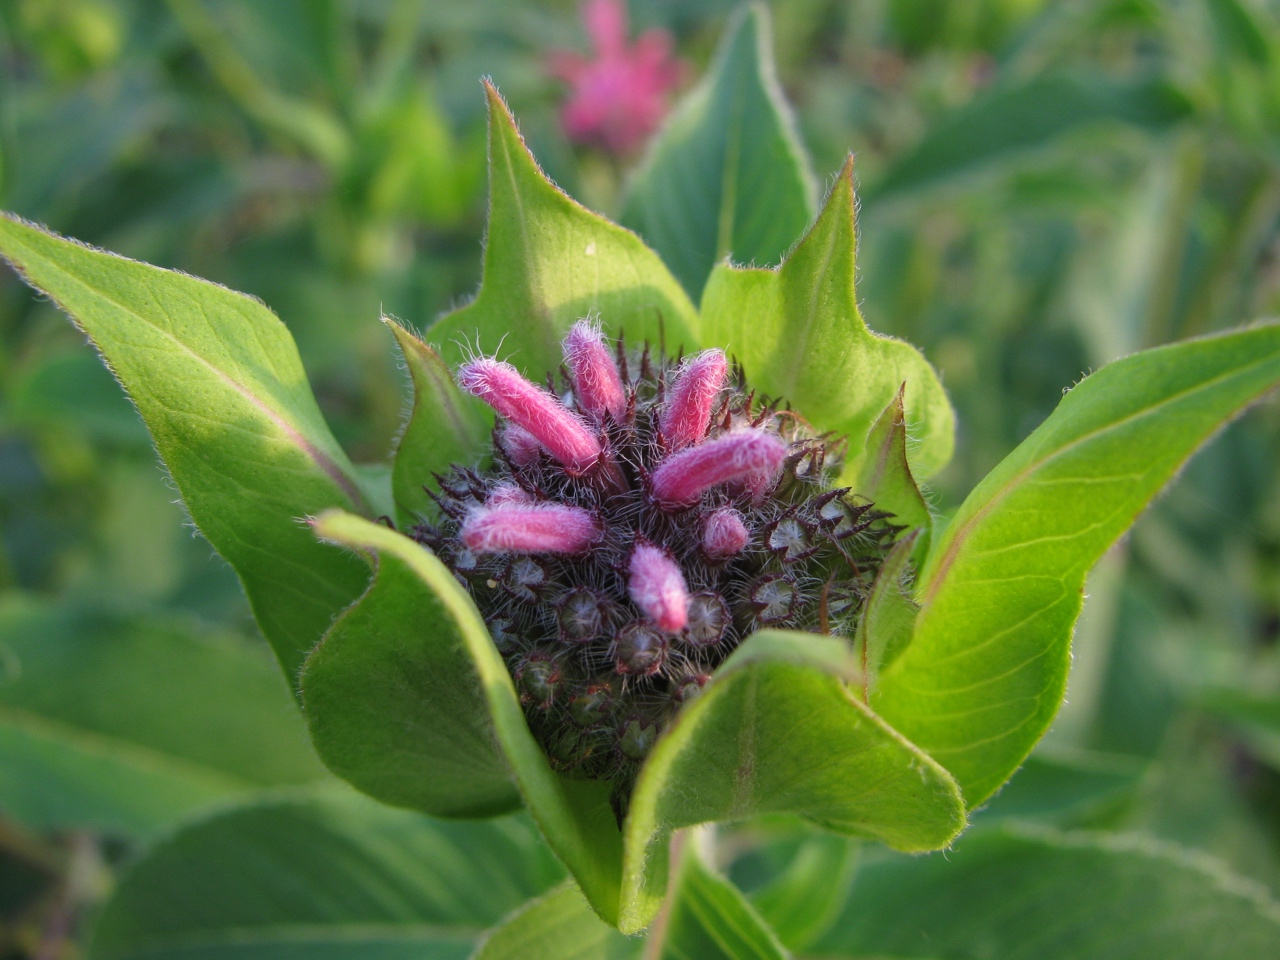 The Scientific Name is Monarda fistulosa. You will likely hear them called Wild Bergamot. This picture shows the Flower buds emerging in early June. Flowers are densely aggregated into head-like clusters of Monarda fistulosa